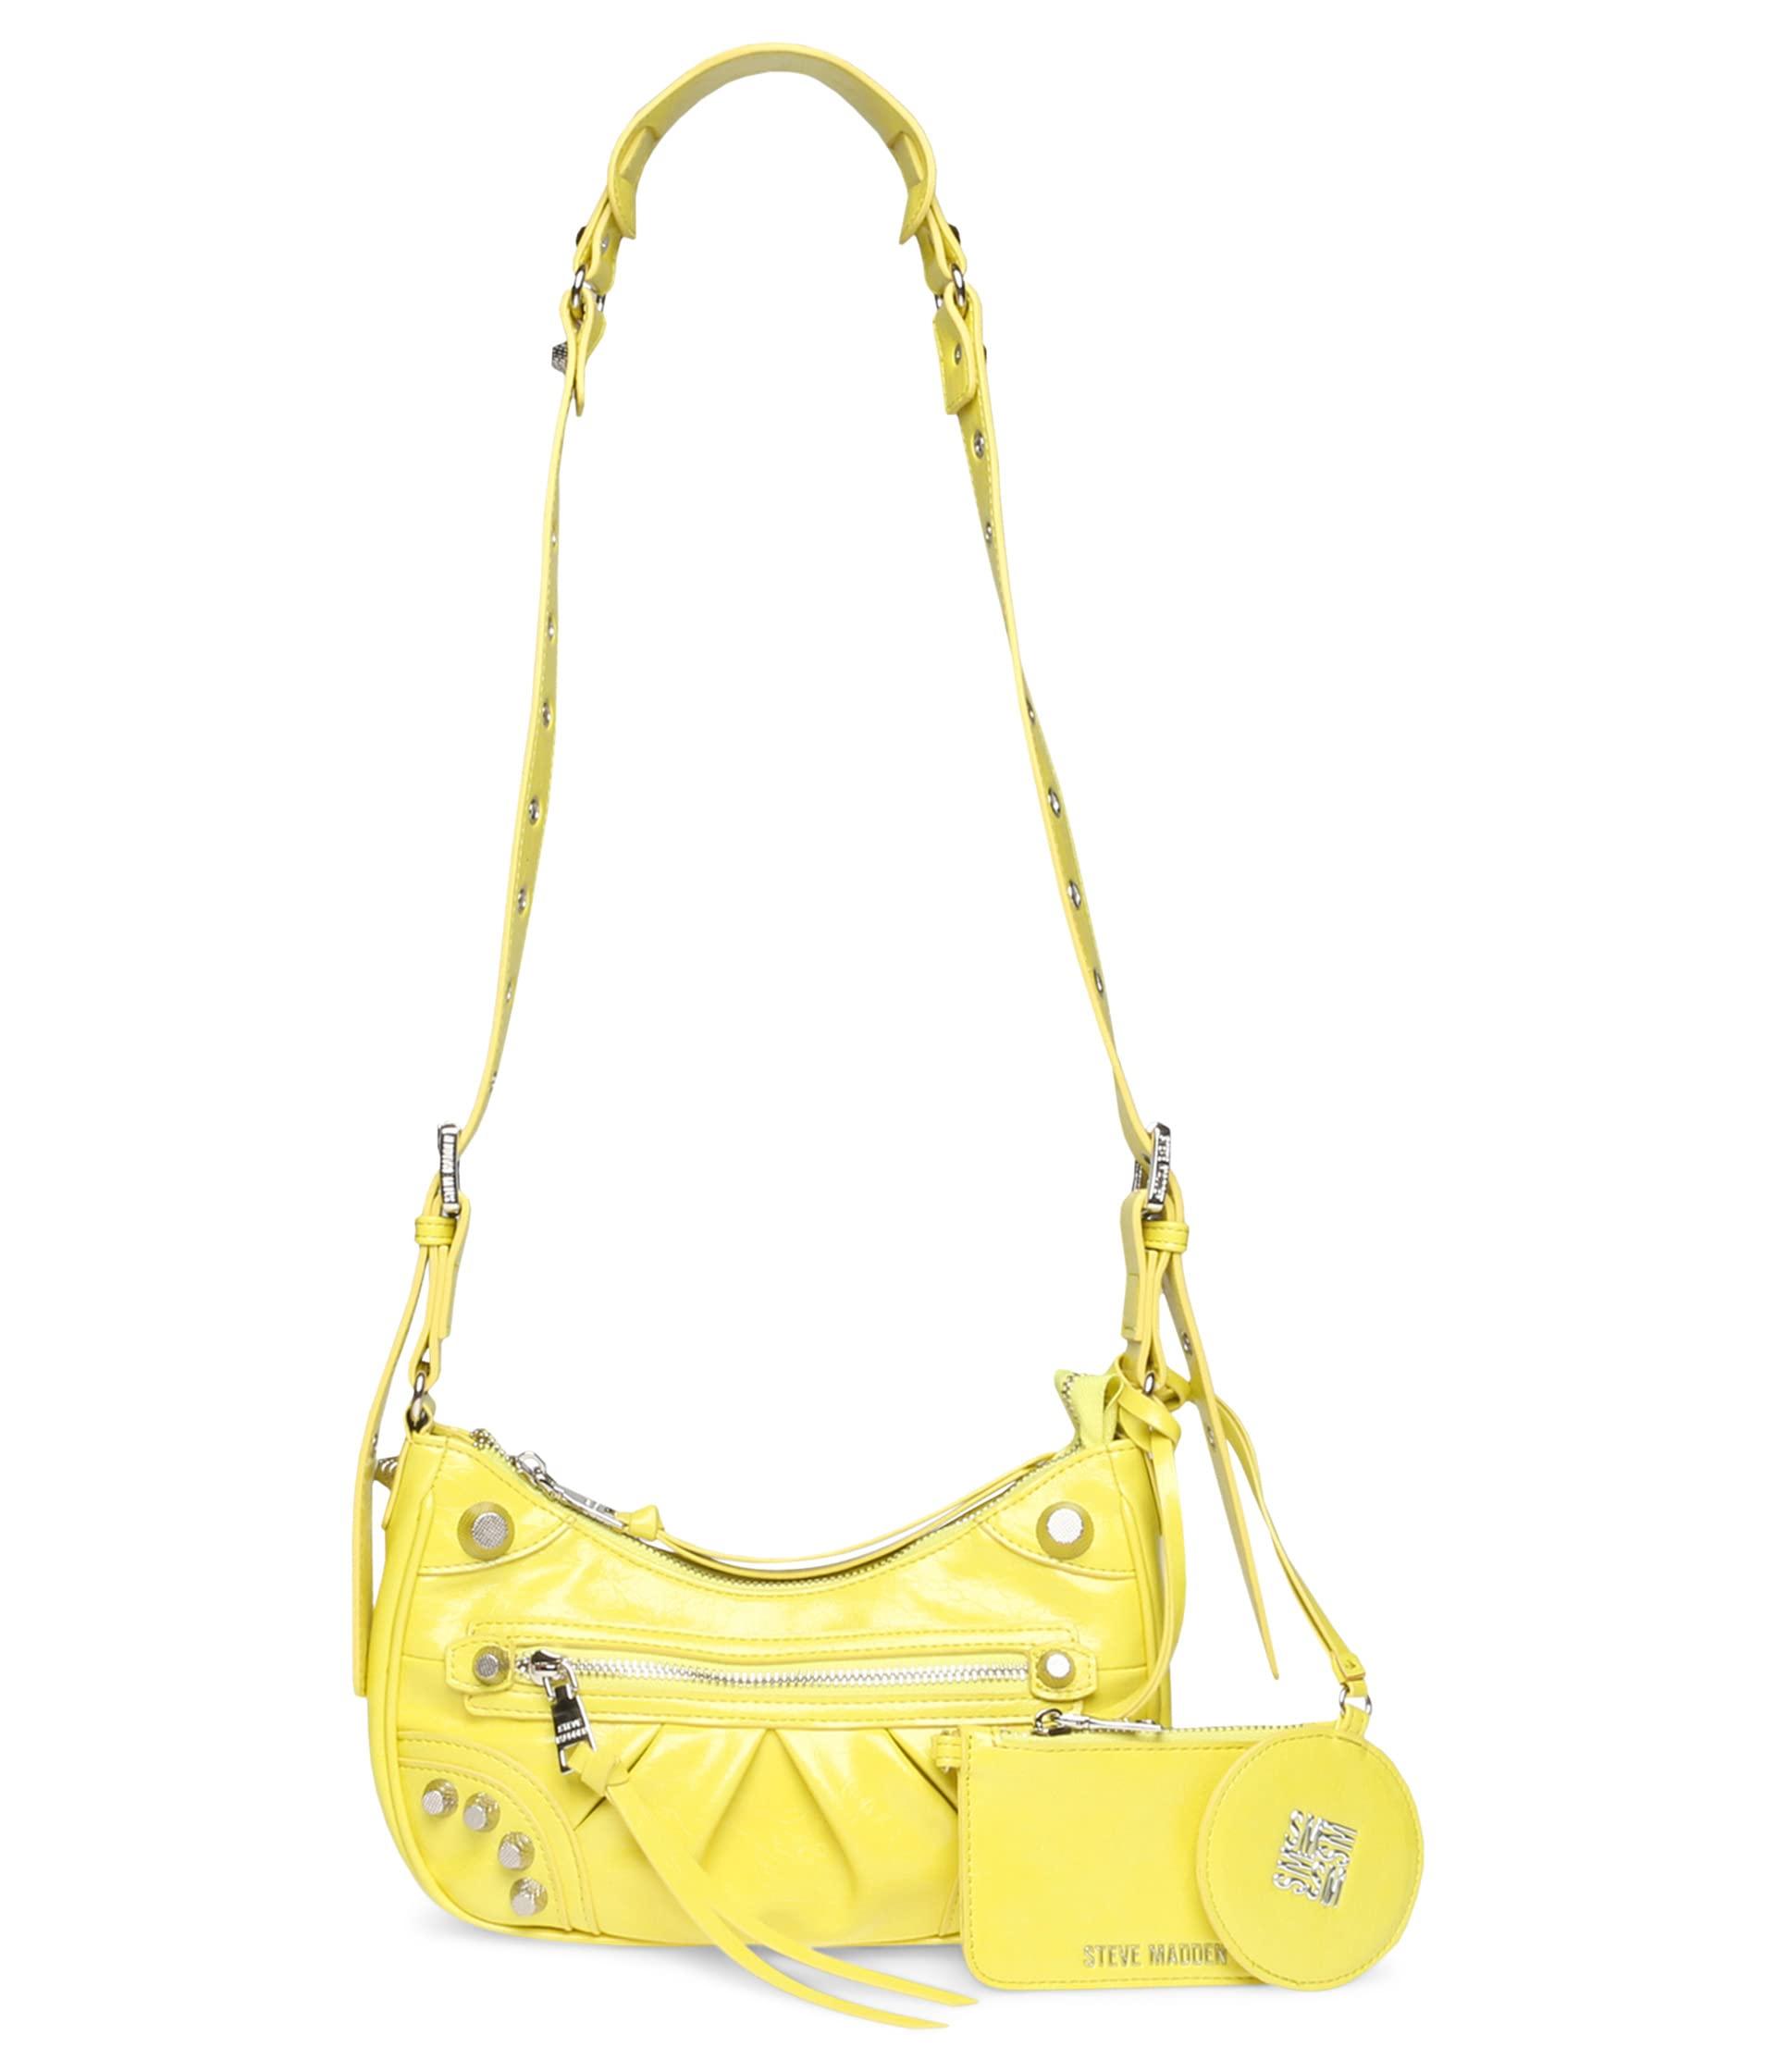 Steve Madden Glowing Crossbody Bag With Mirror in Yellow | Lyst